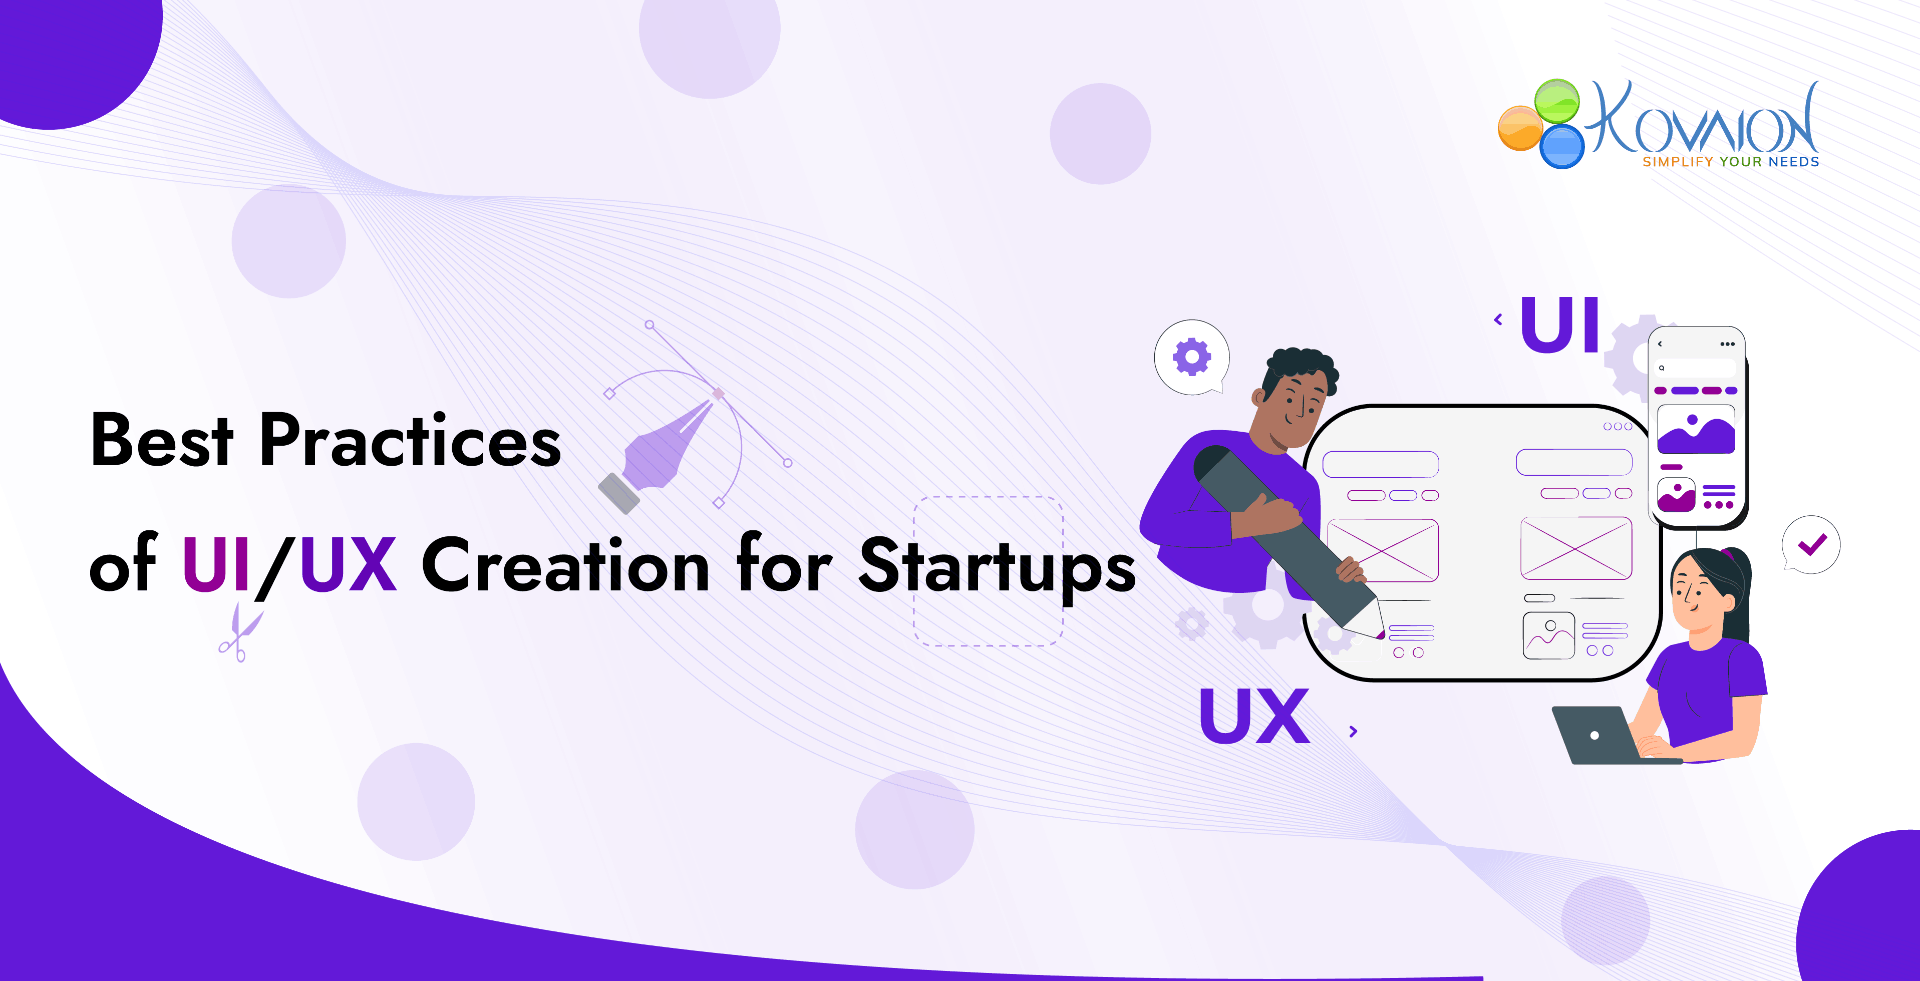 Best Practices of UI/UX Creation for Startups